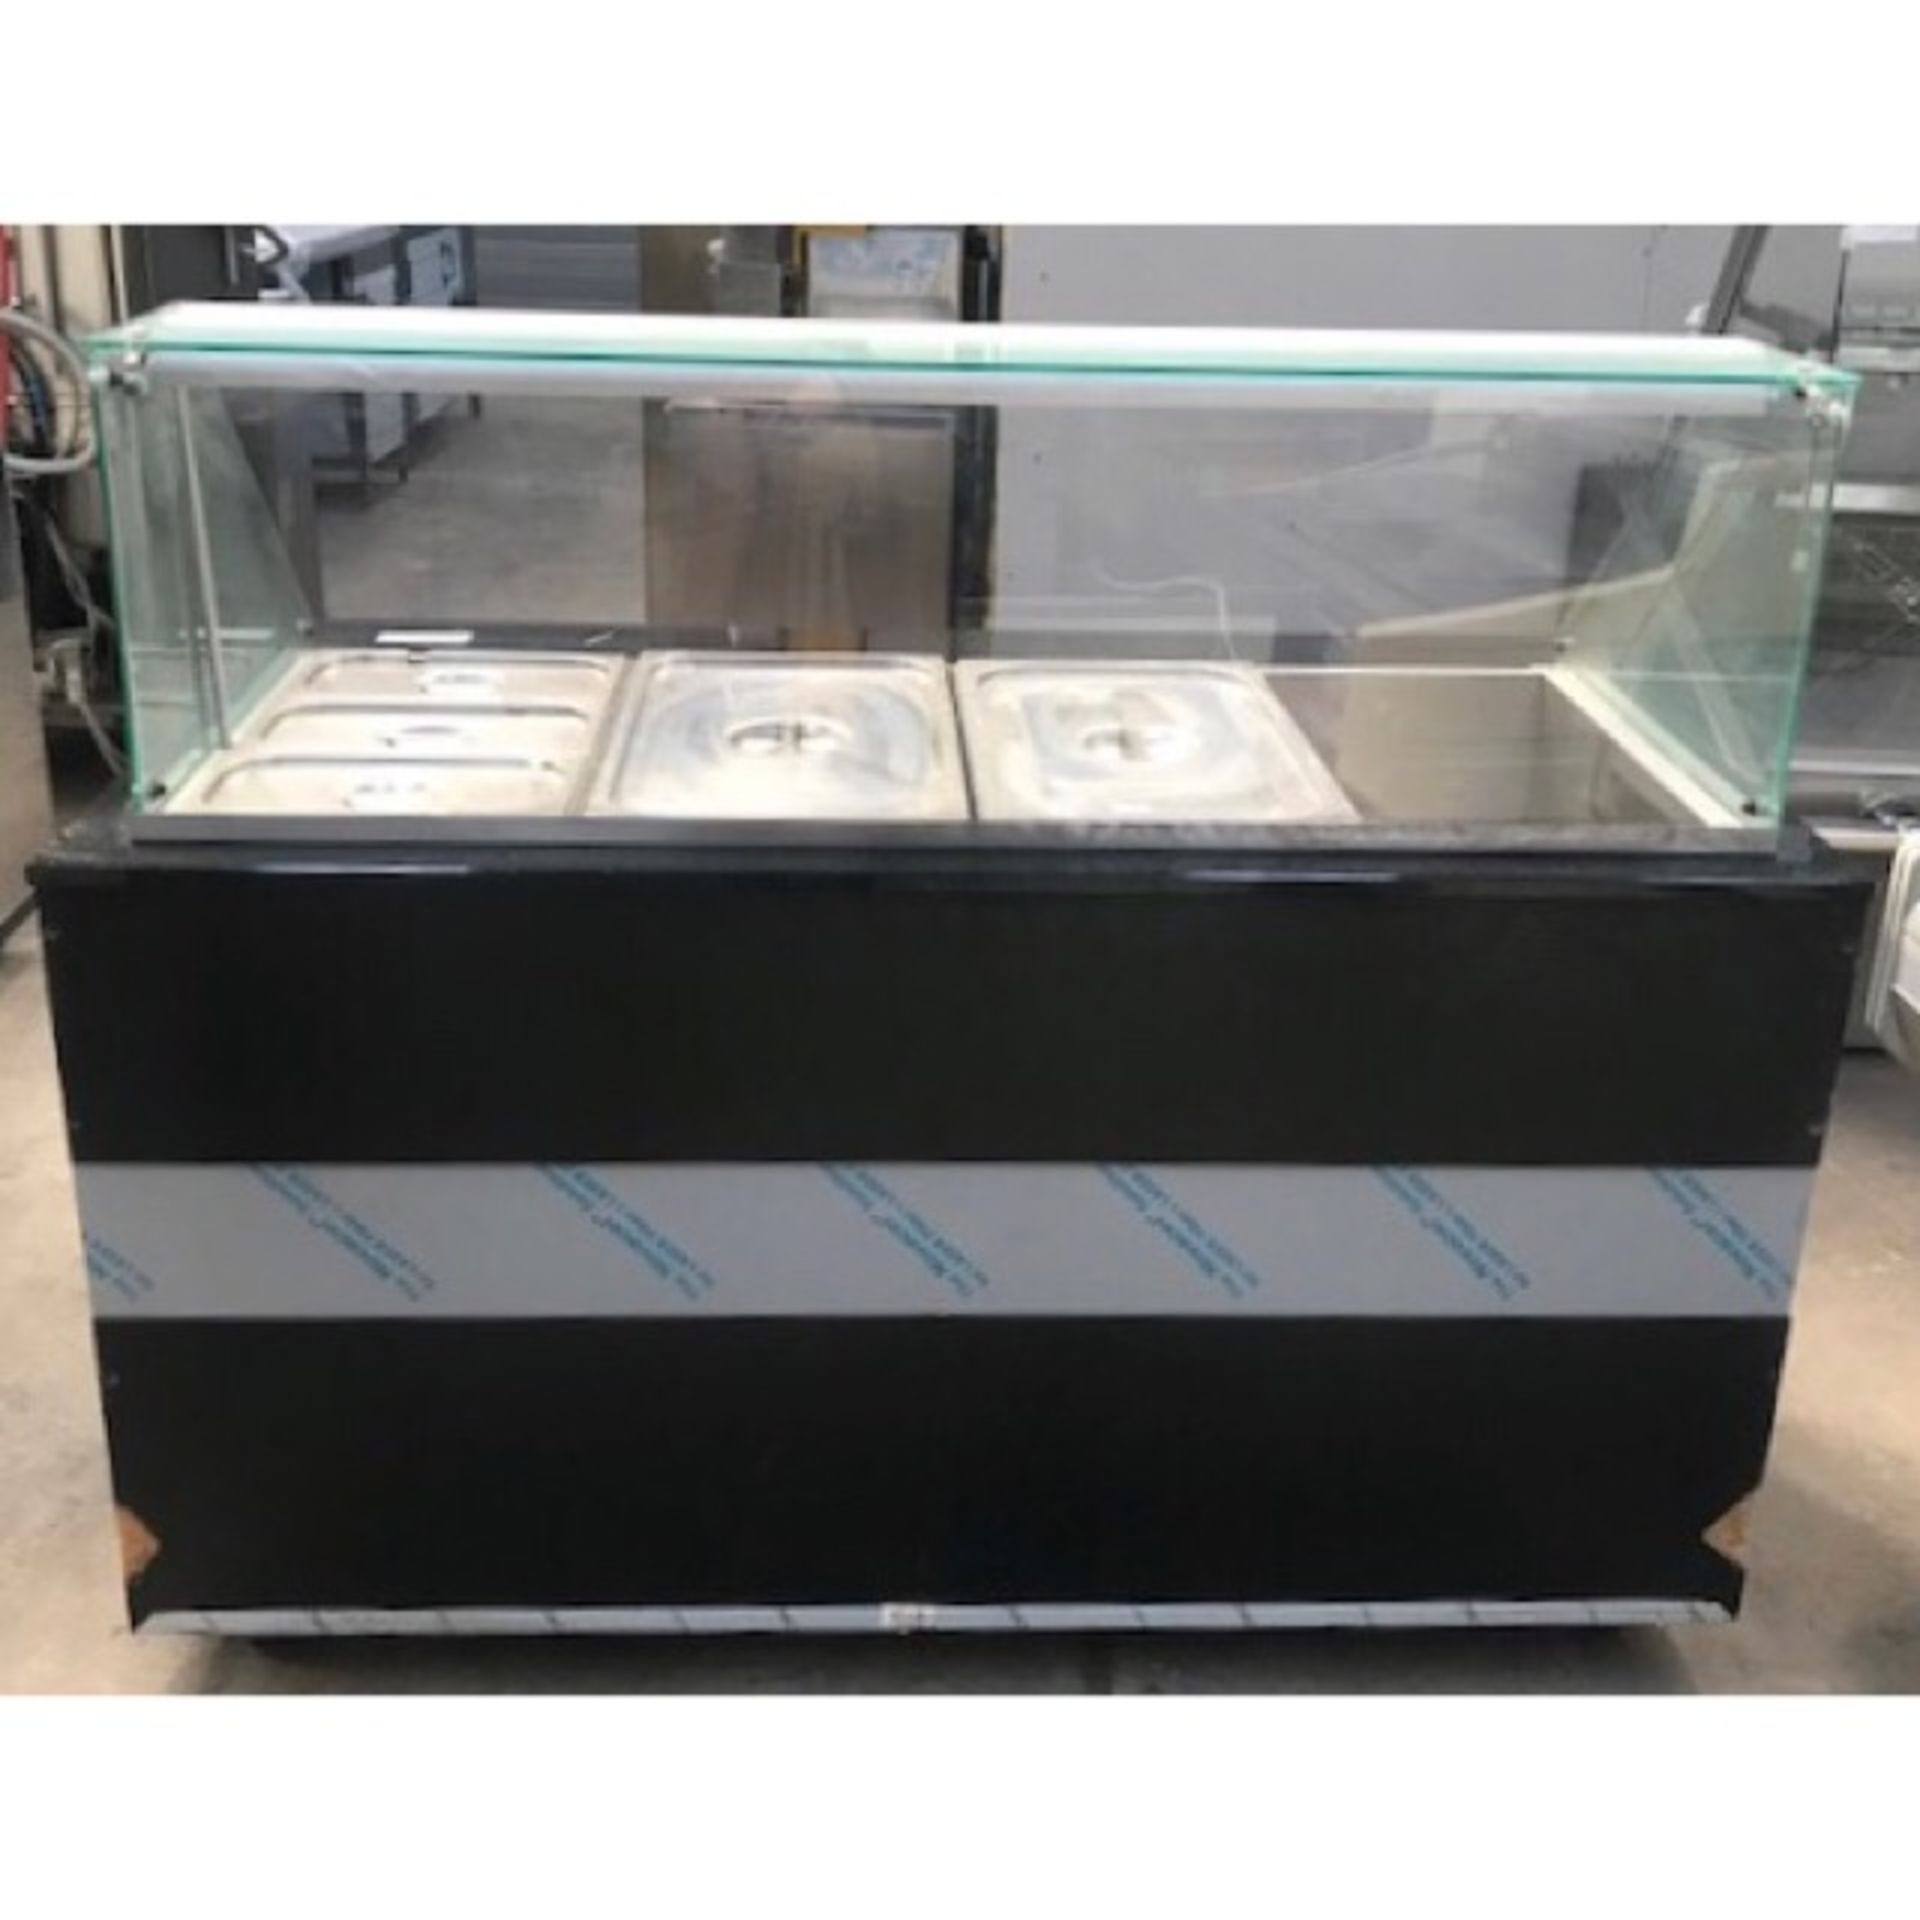 Igloo NST64174 Heated Servery with glass surround Heated servery unit with capacity for 4 x 1/1